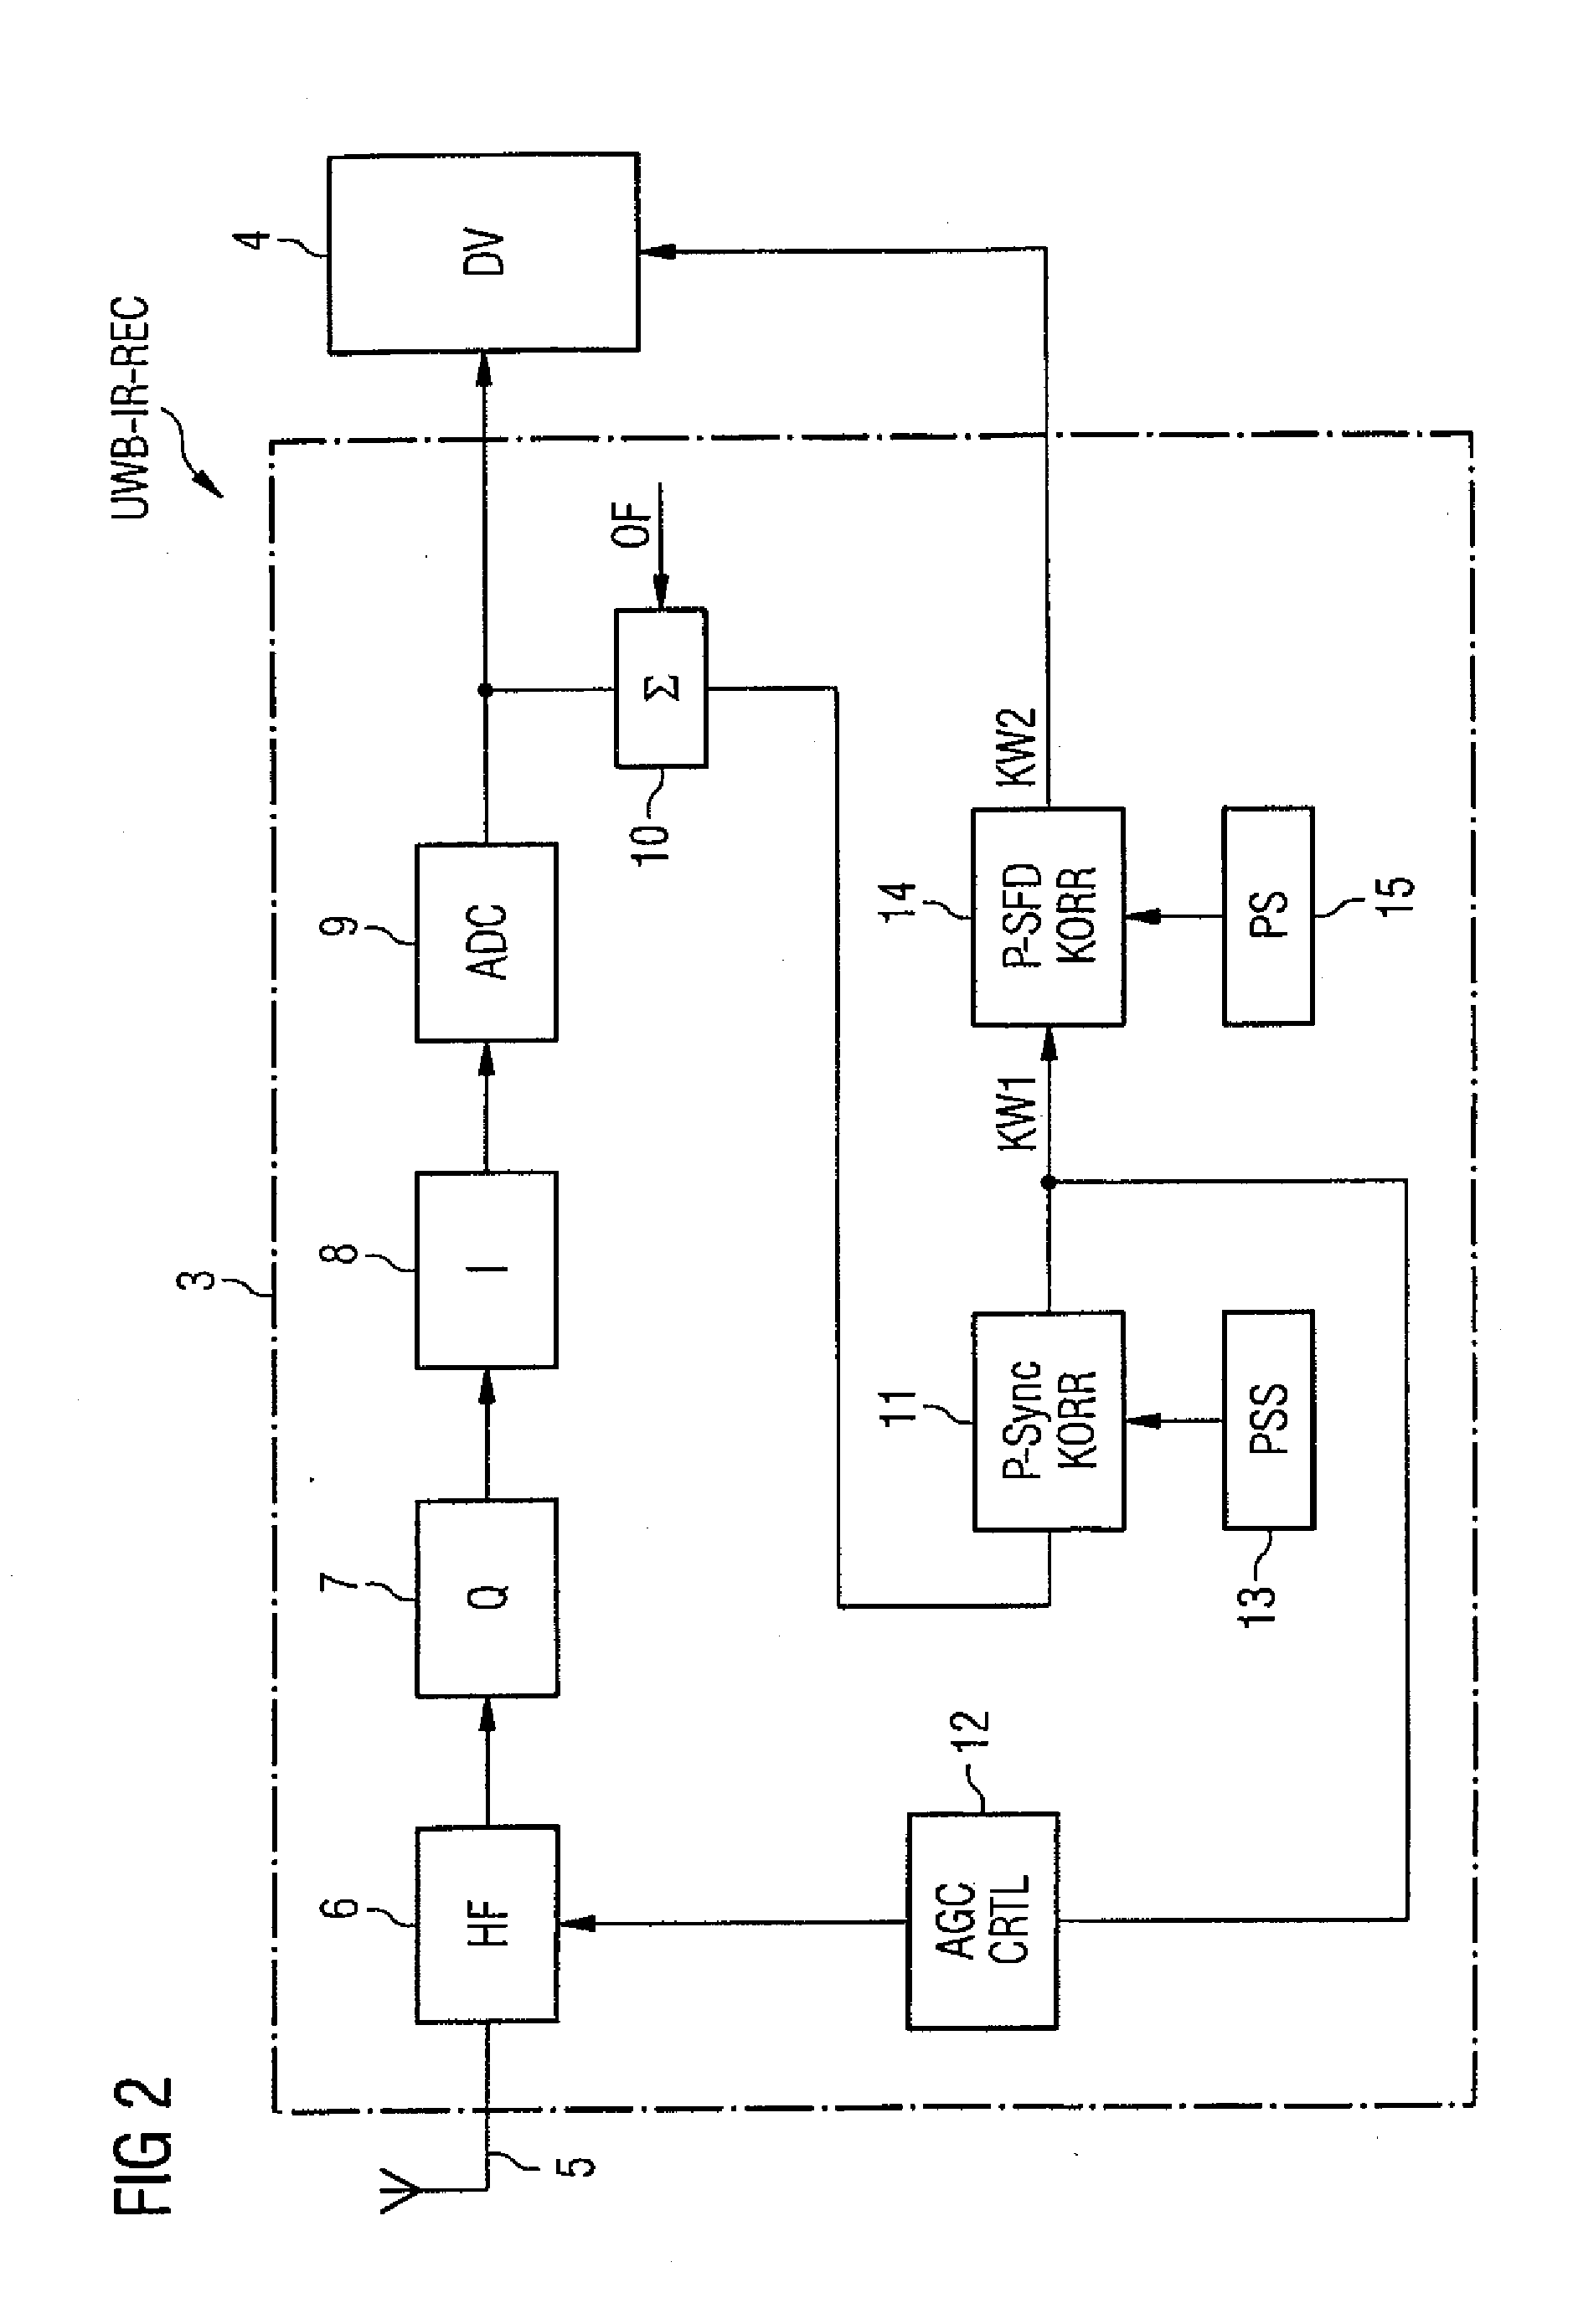 Method and Apparatus for Wireless Transmission of Data Packets